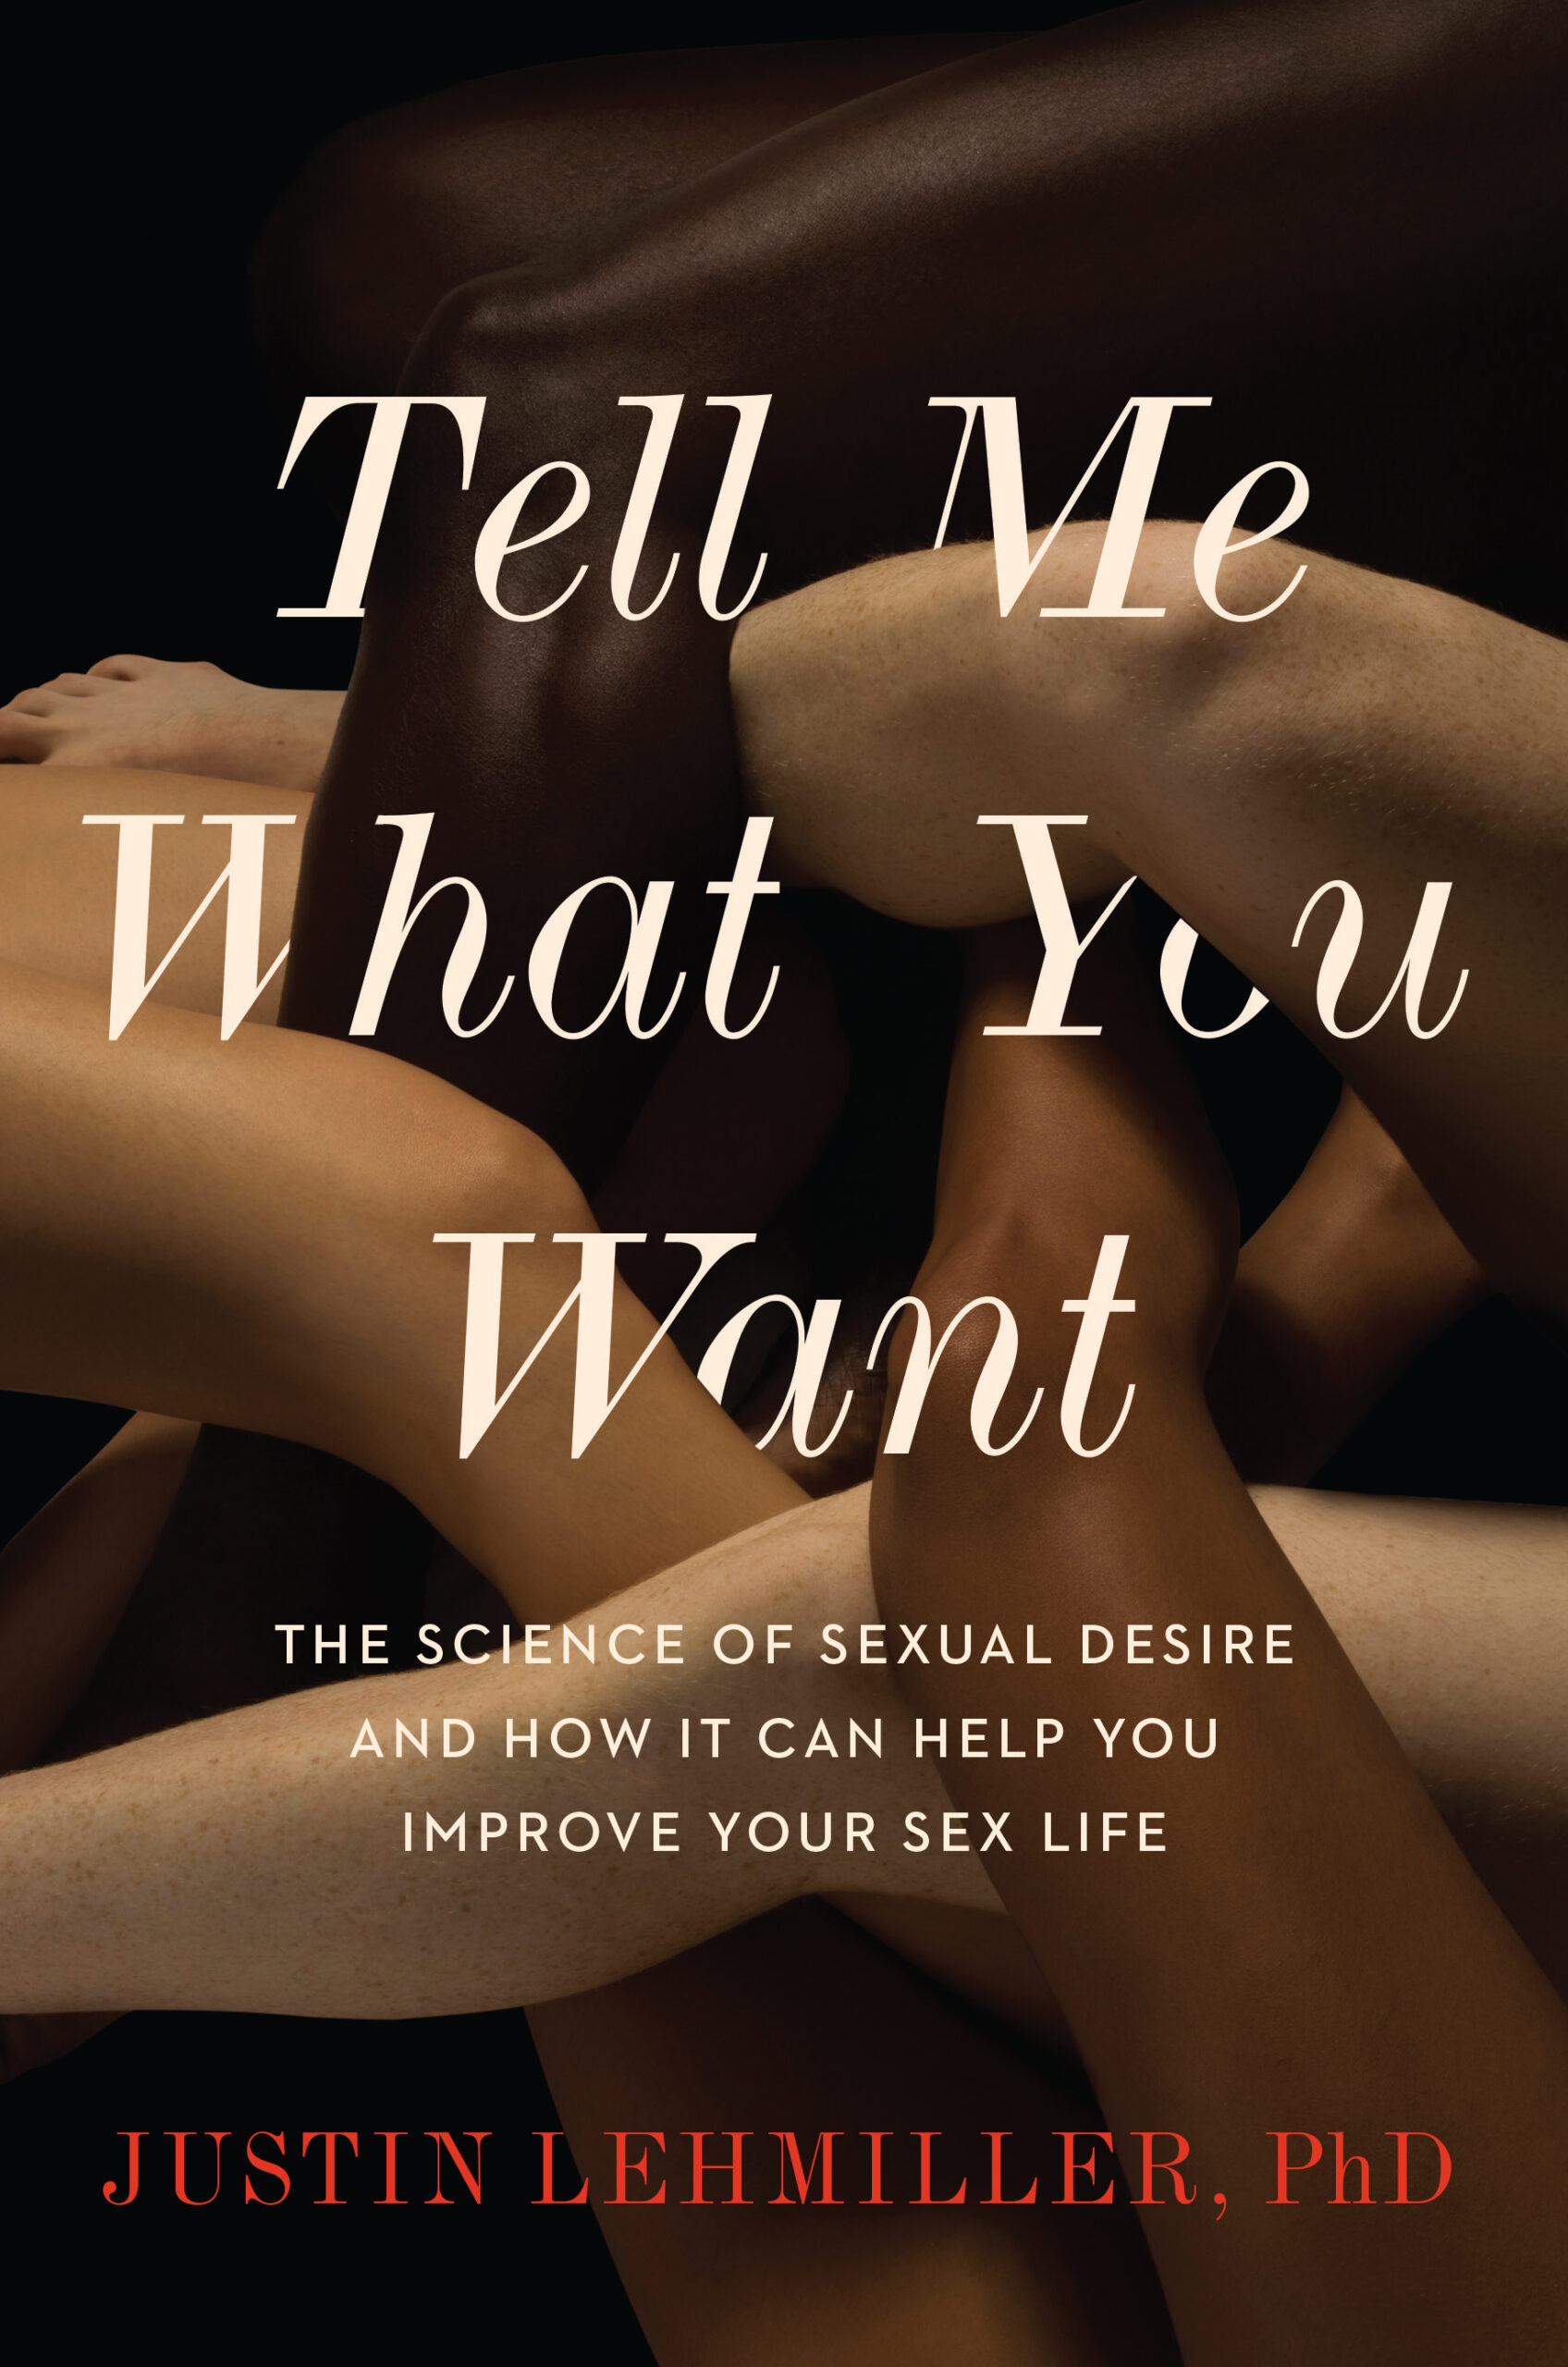 What I Learned By Asking 4,000 Americans About Their Biggest Sex Fantasies